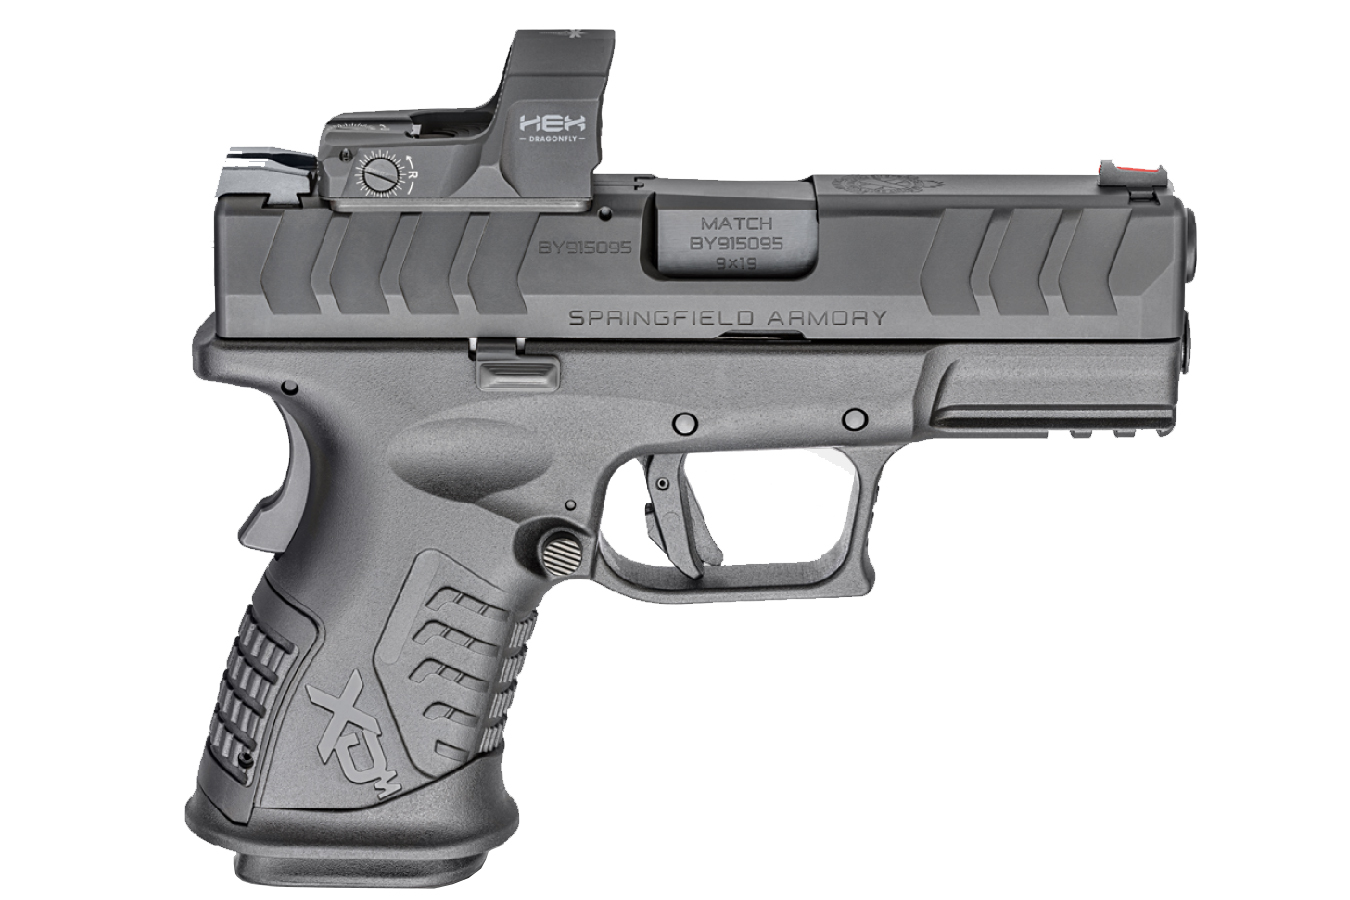 XDM ELITE 3.8 OSP COMPACT 9MM PISTOL WITH HEX DRAGONFLY RED DOT (LE)